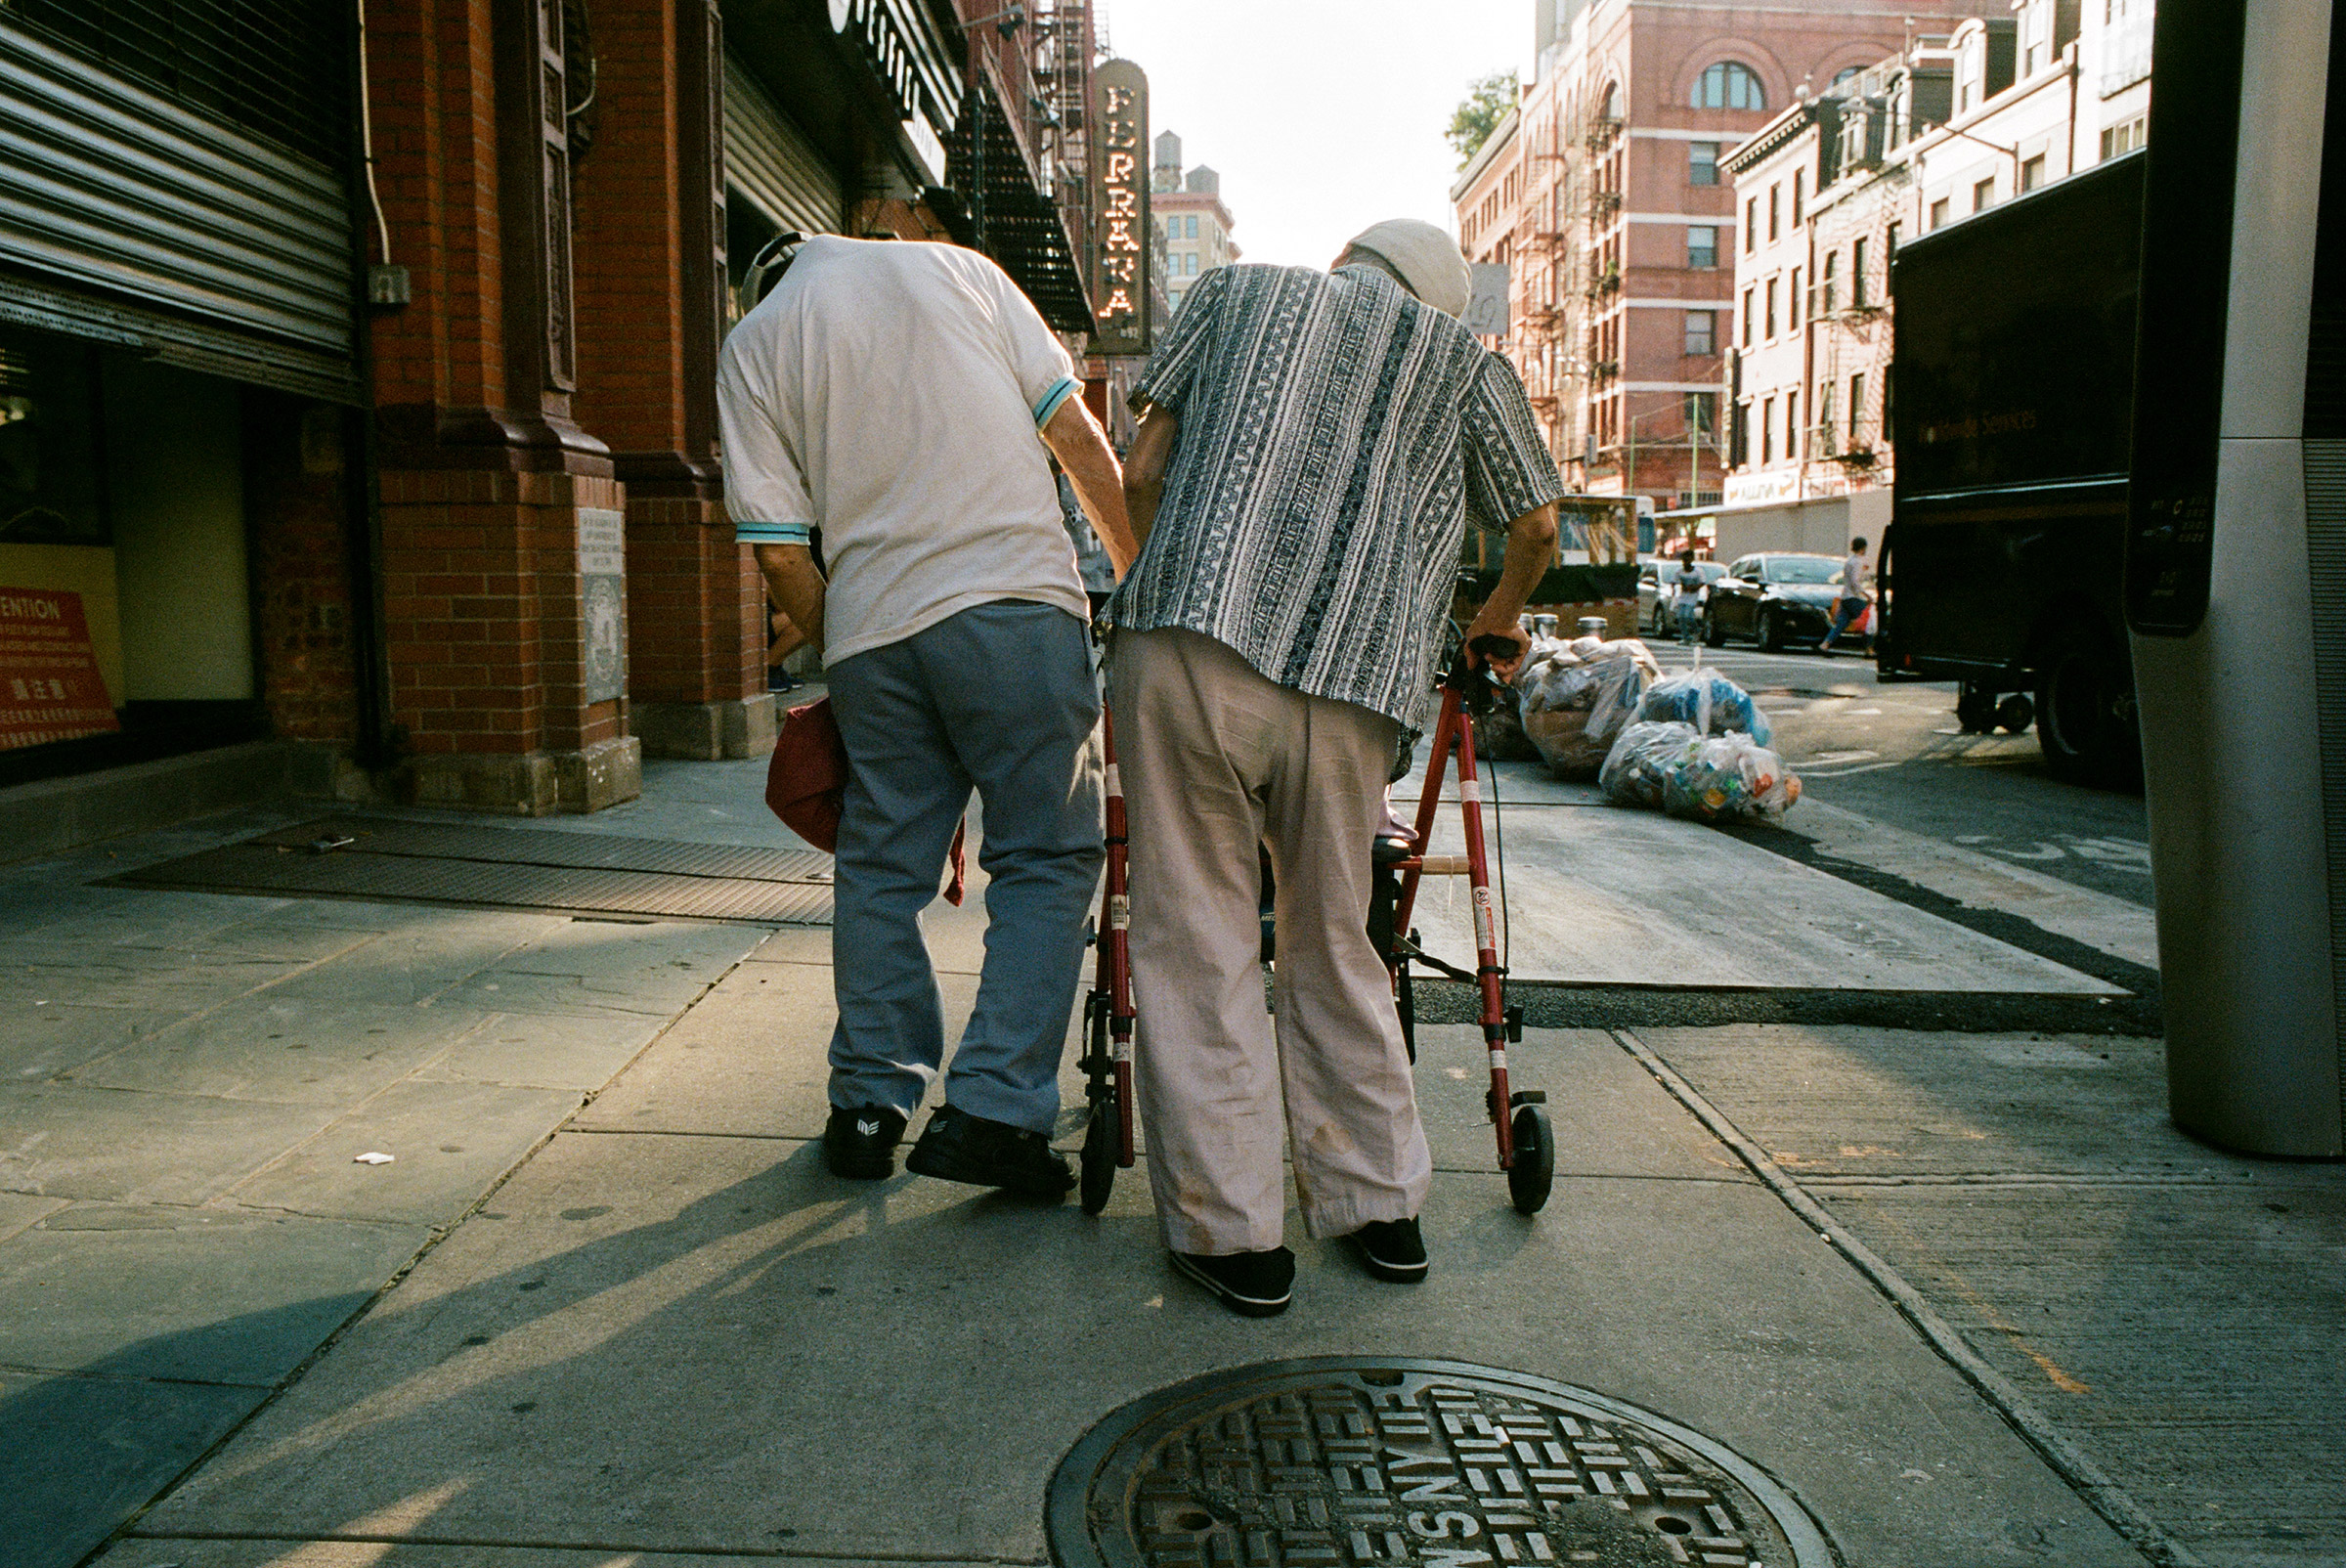 Pedestrians lean on each other in Chinatown, Aug. 27, 2021. (Daniel Arnold for TIME)